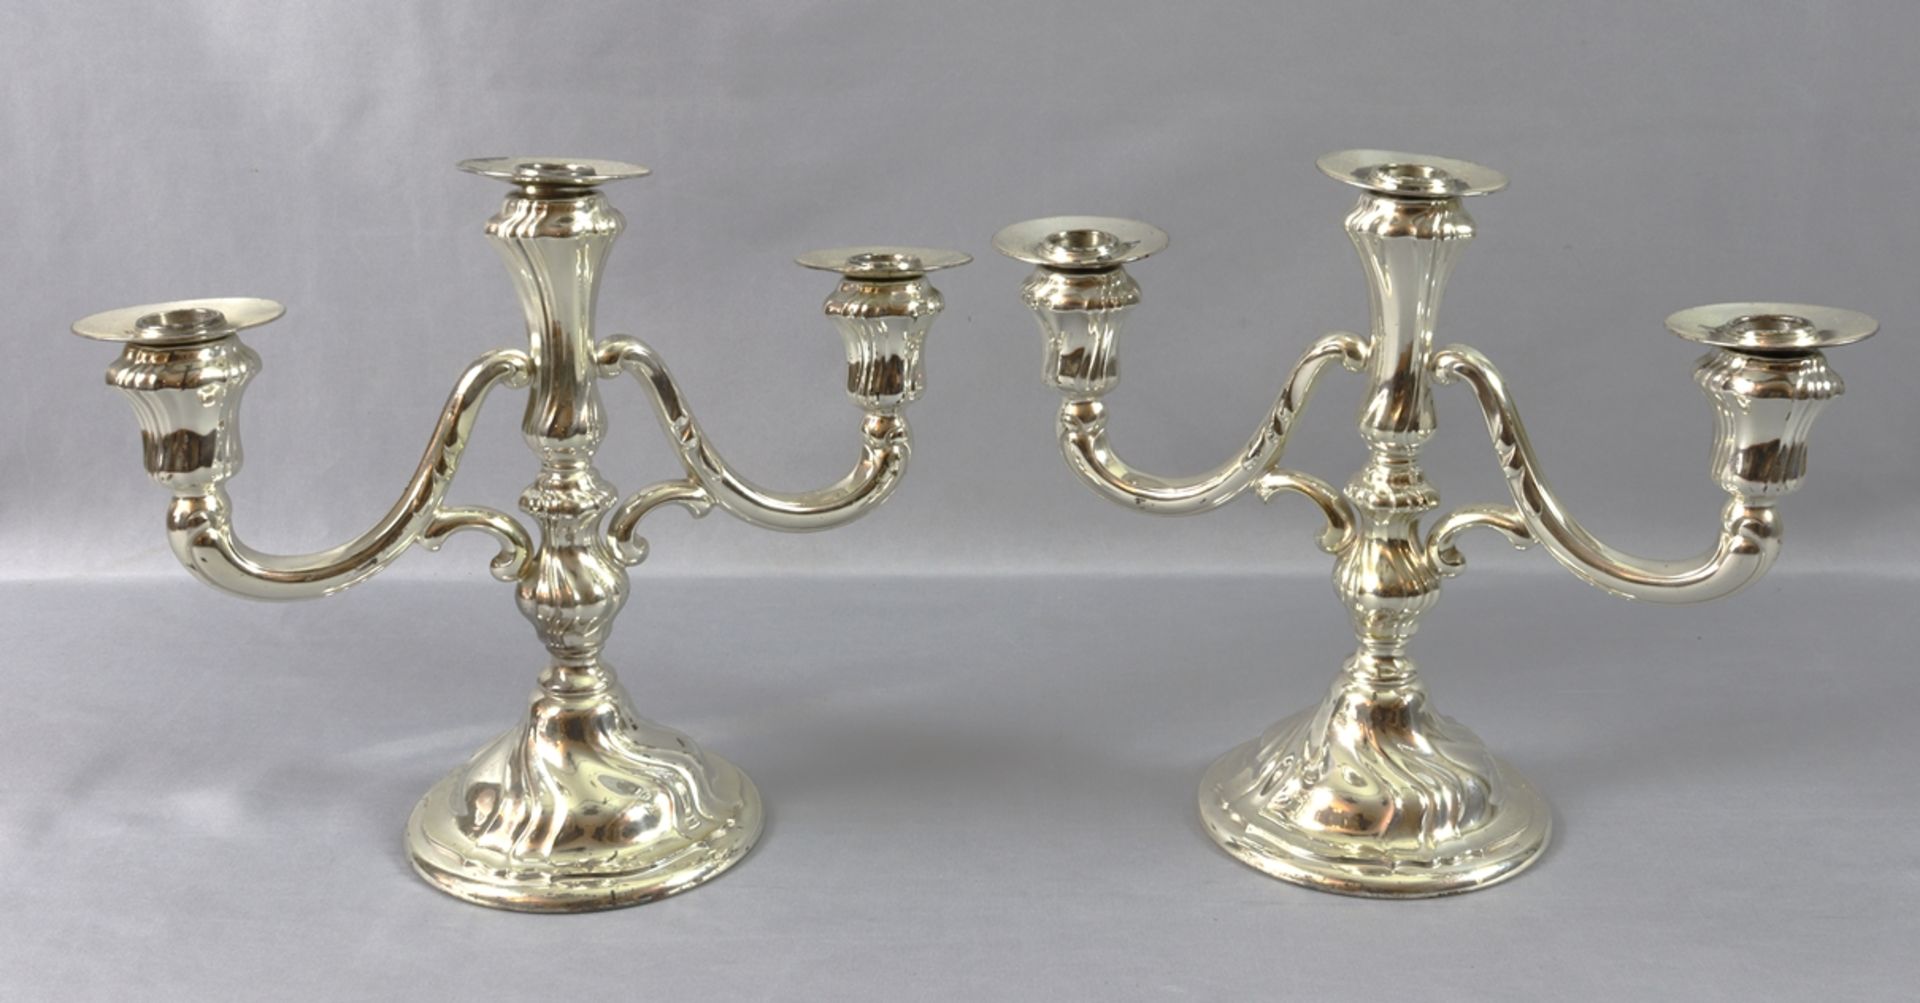 Pair of table candlesticks, English of the 20/30s of the 20th century.